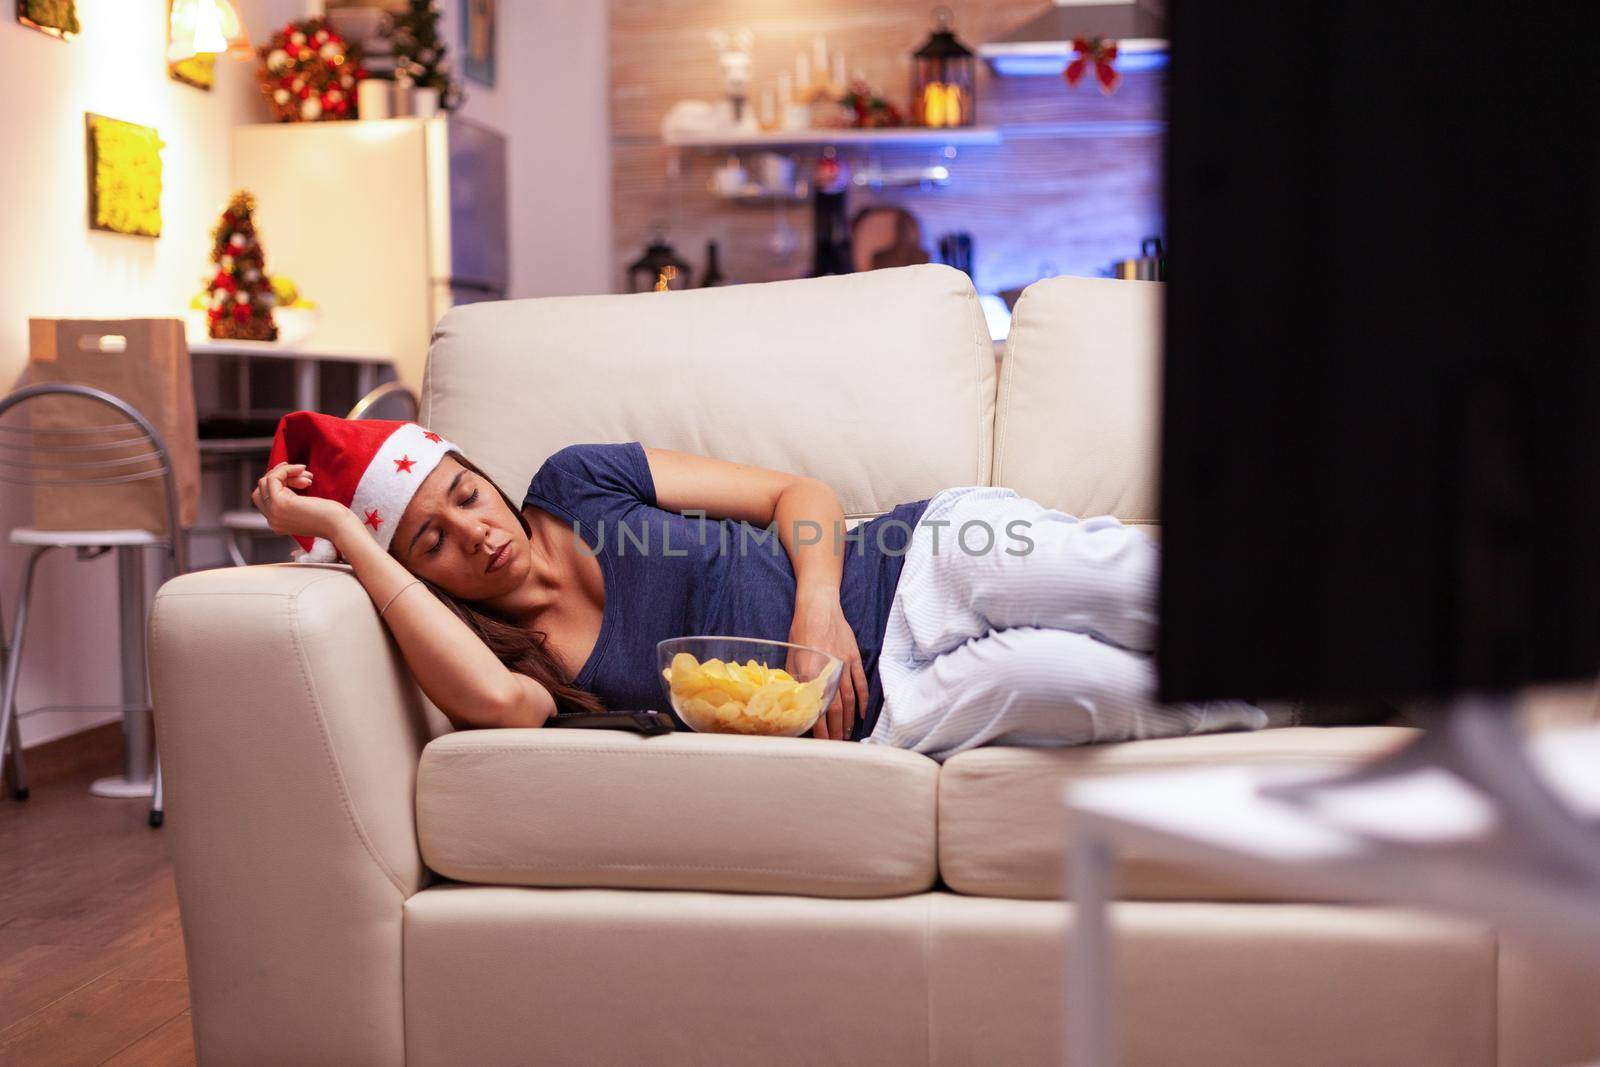 Tired woman falling asleep on sofa while watching xmas movie on television during christmastime enjoying winter season in x-mas decorated kitchen. Adult person celebrating christmas holiday